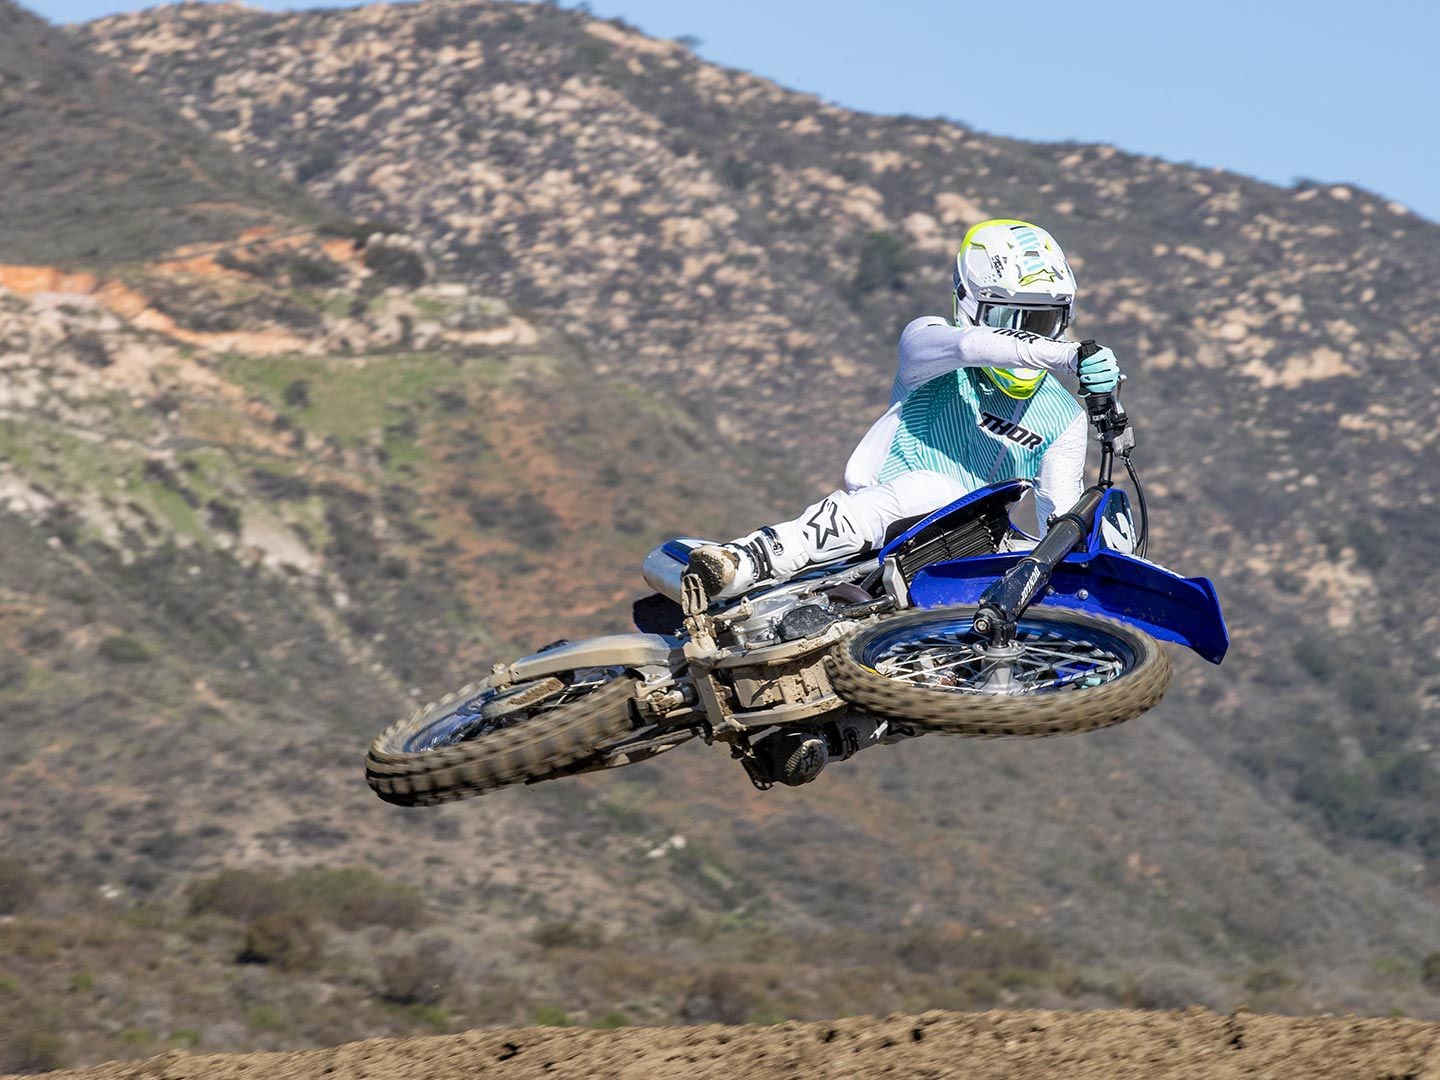 “The YZ250F remains widest in the class and although I prefer a narrower feeling bike, I can’t argue with its superb stability and handling.” <i>—Michael Wicker</i>